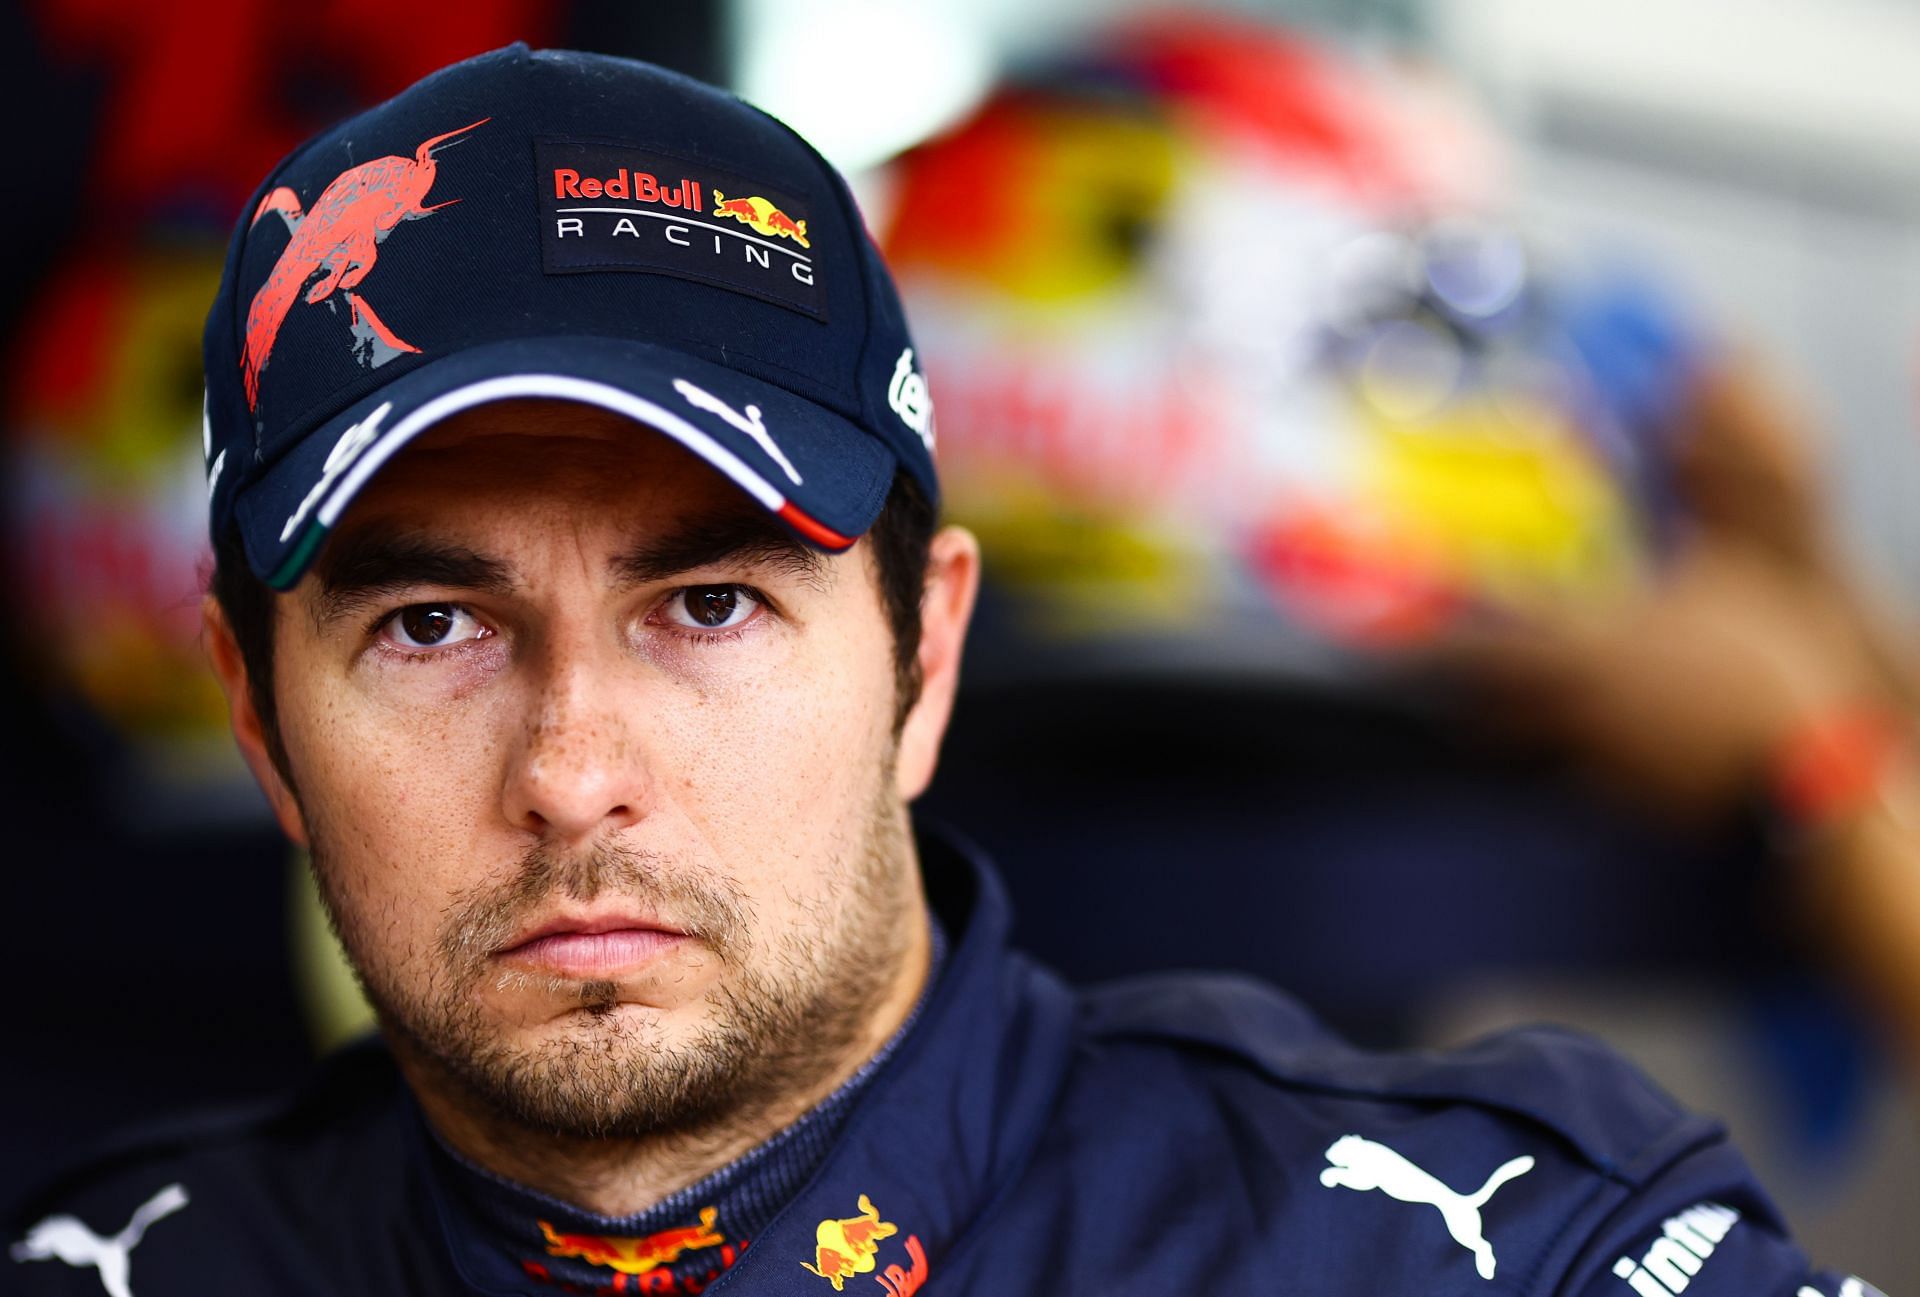 Sergio Perez looks on in the garage during qualifying ahead of the 2022 Saudi Arabian GP (Photo by Mark Thompson/Getty Images)